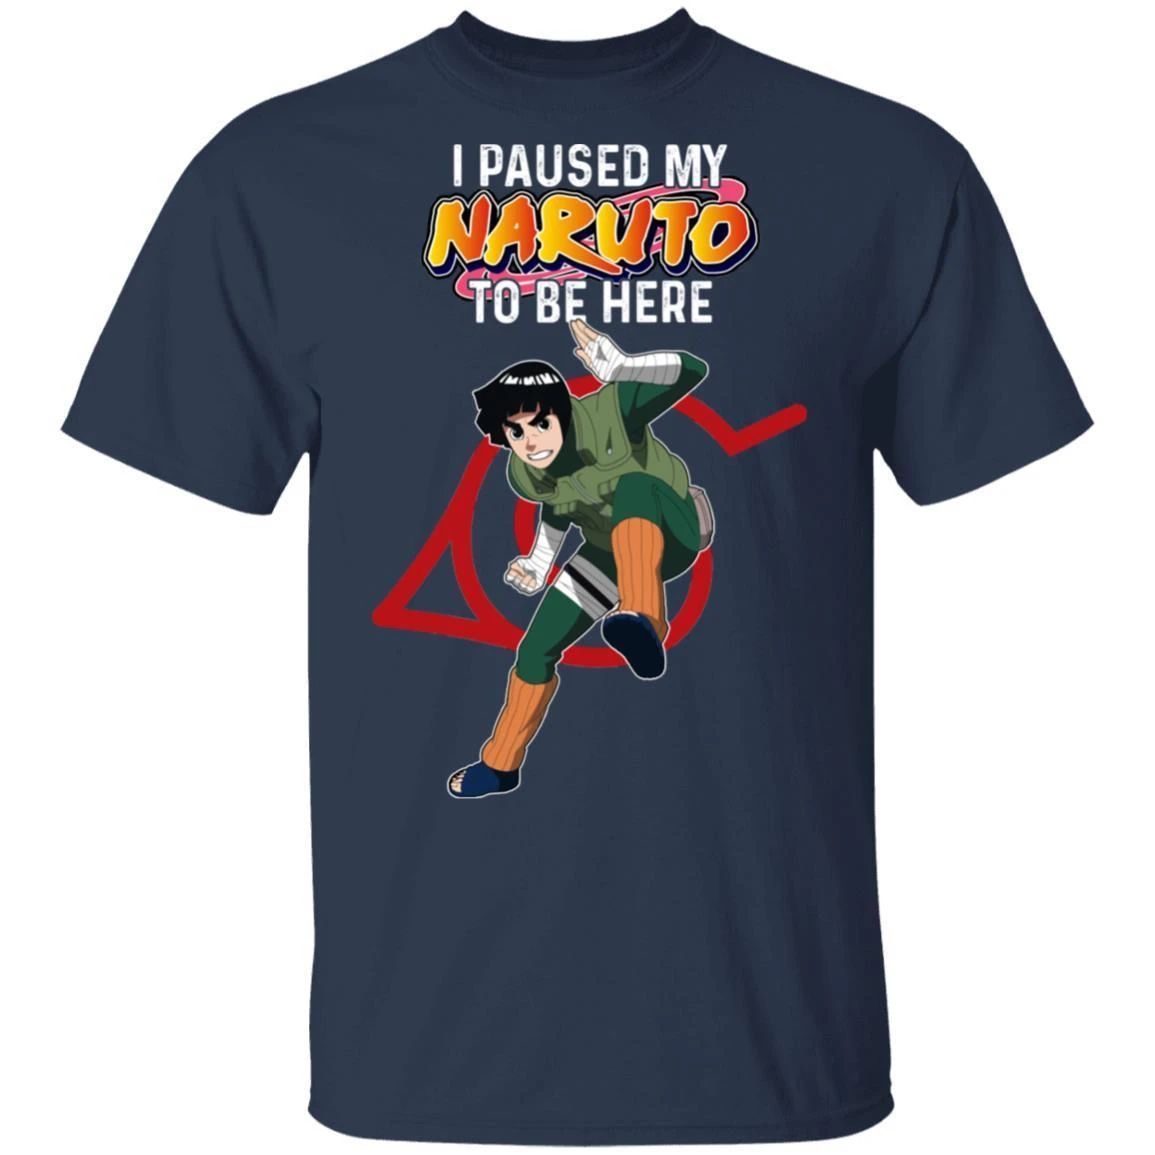 I Paused My Naruto To Be Here Shirt Rock Lee Tee 1